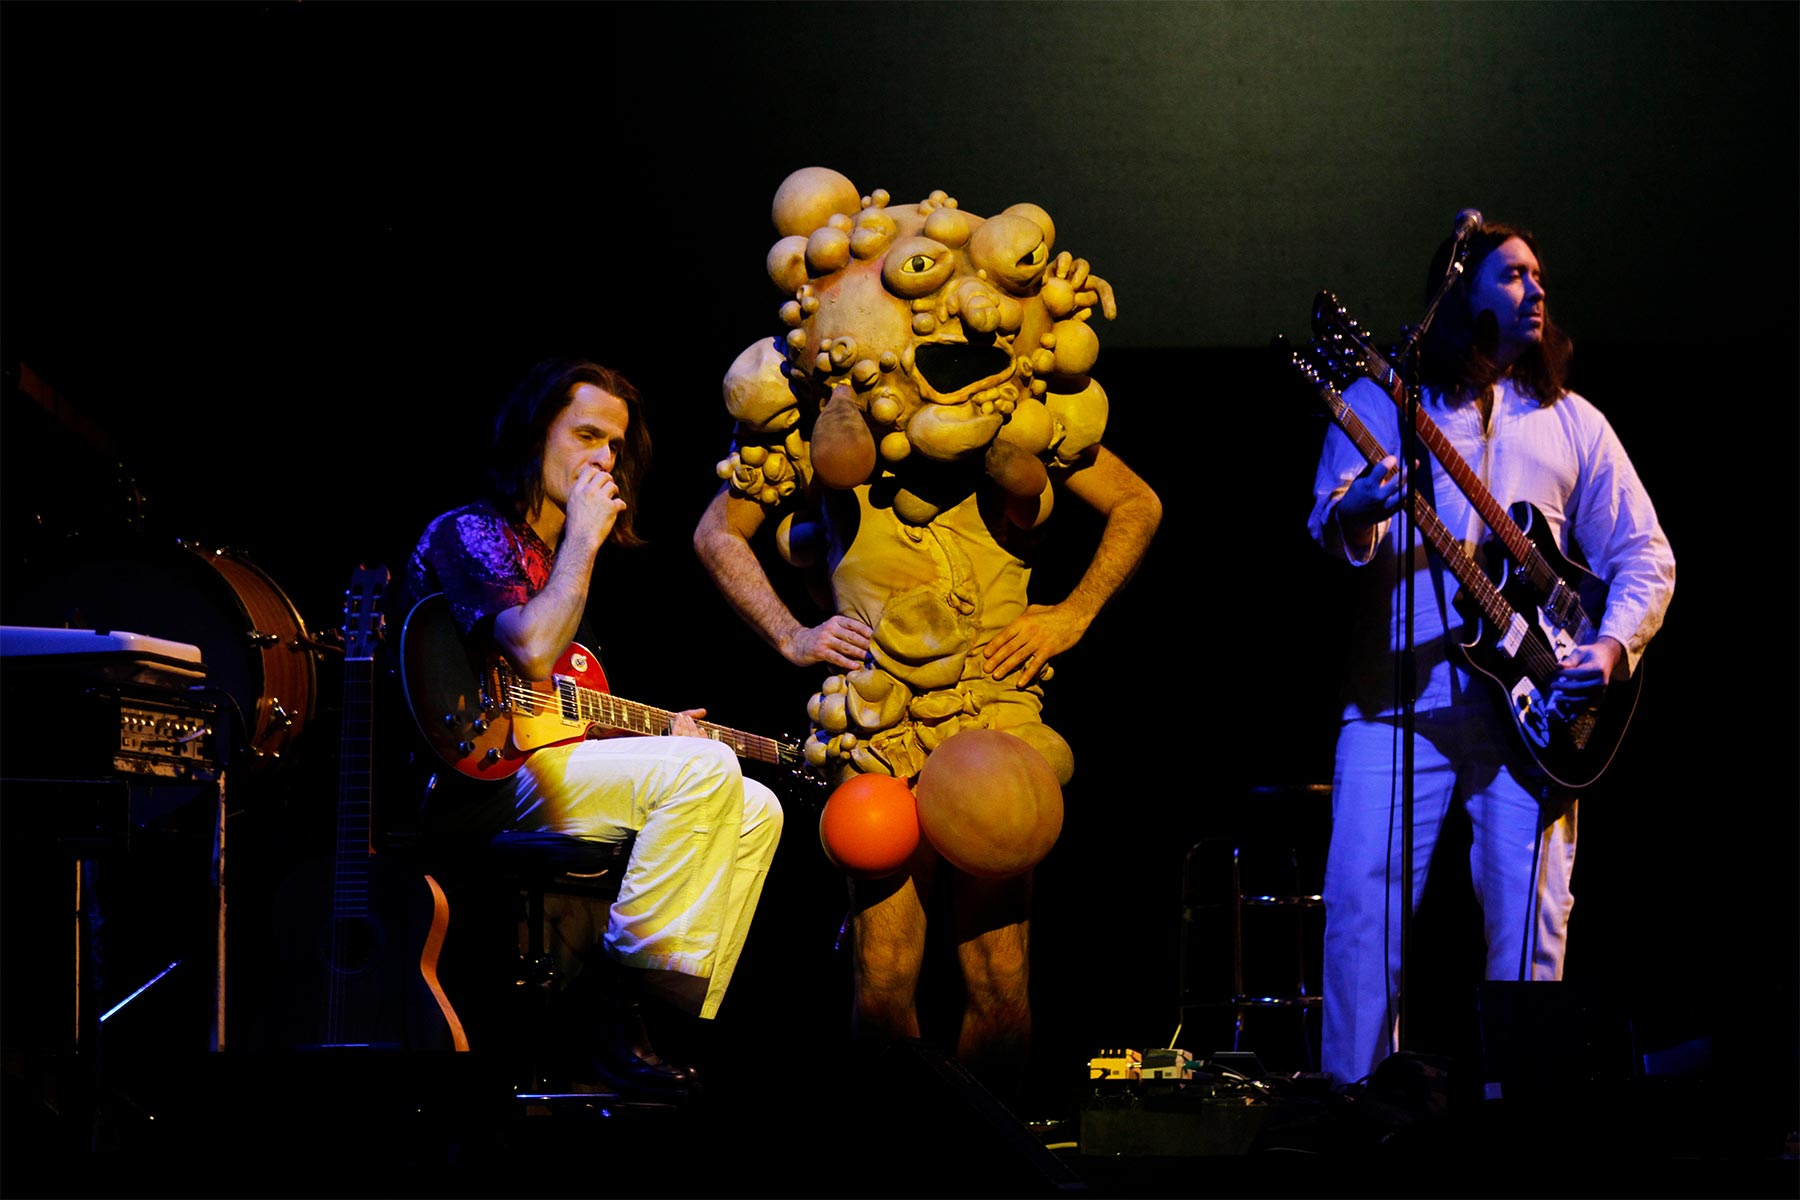 A photo of Canadian tribute band the Music Box performing Genesis’s song “The Colony of Slippermen” as part of their recreation of their album The Lamb Lies Down on Broadway. Someone wears a costume of the deformed man described in the song.